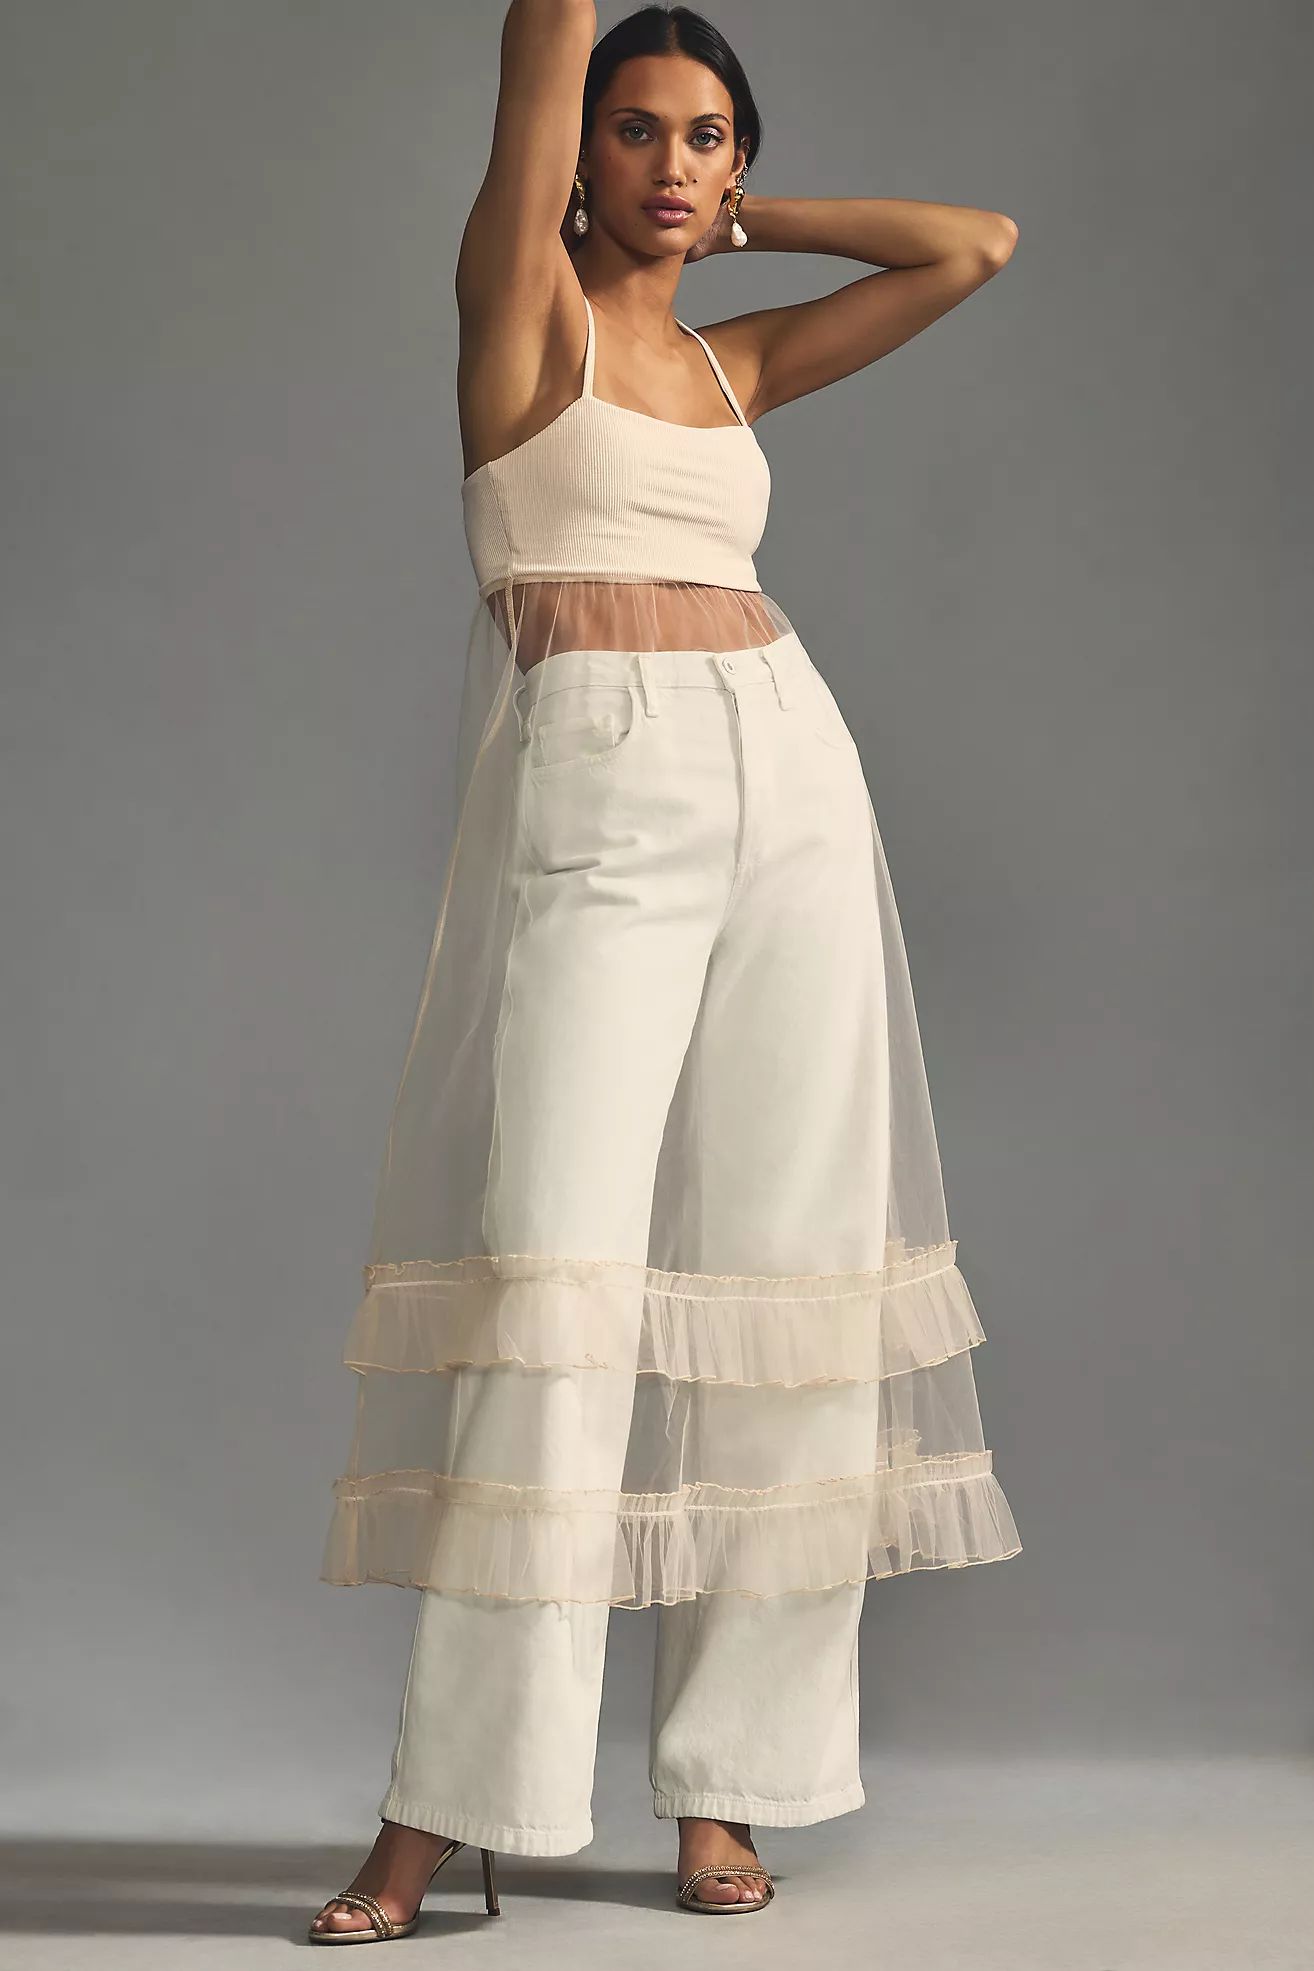 By Anthropologie Sheer Tulle Dress | Anthropologie (US)